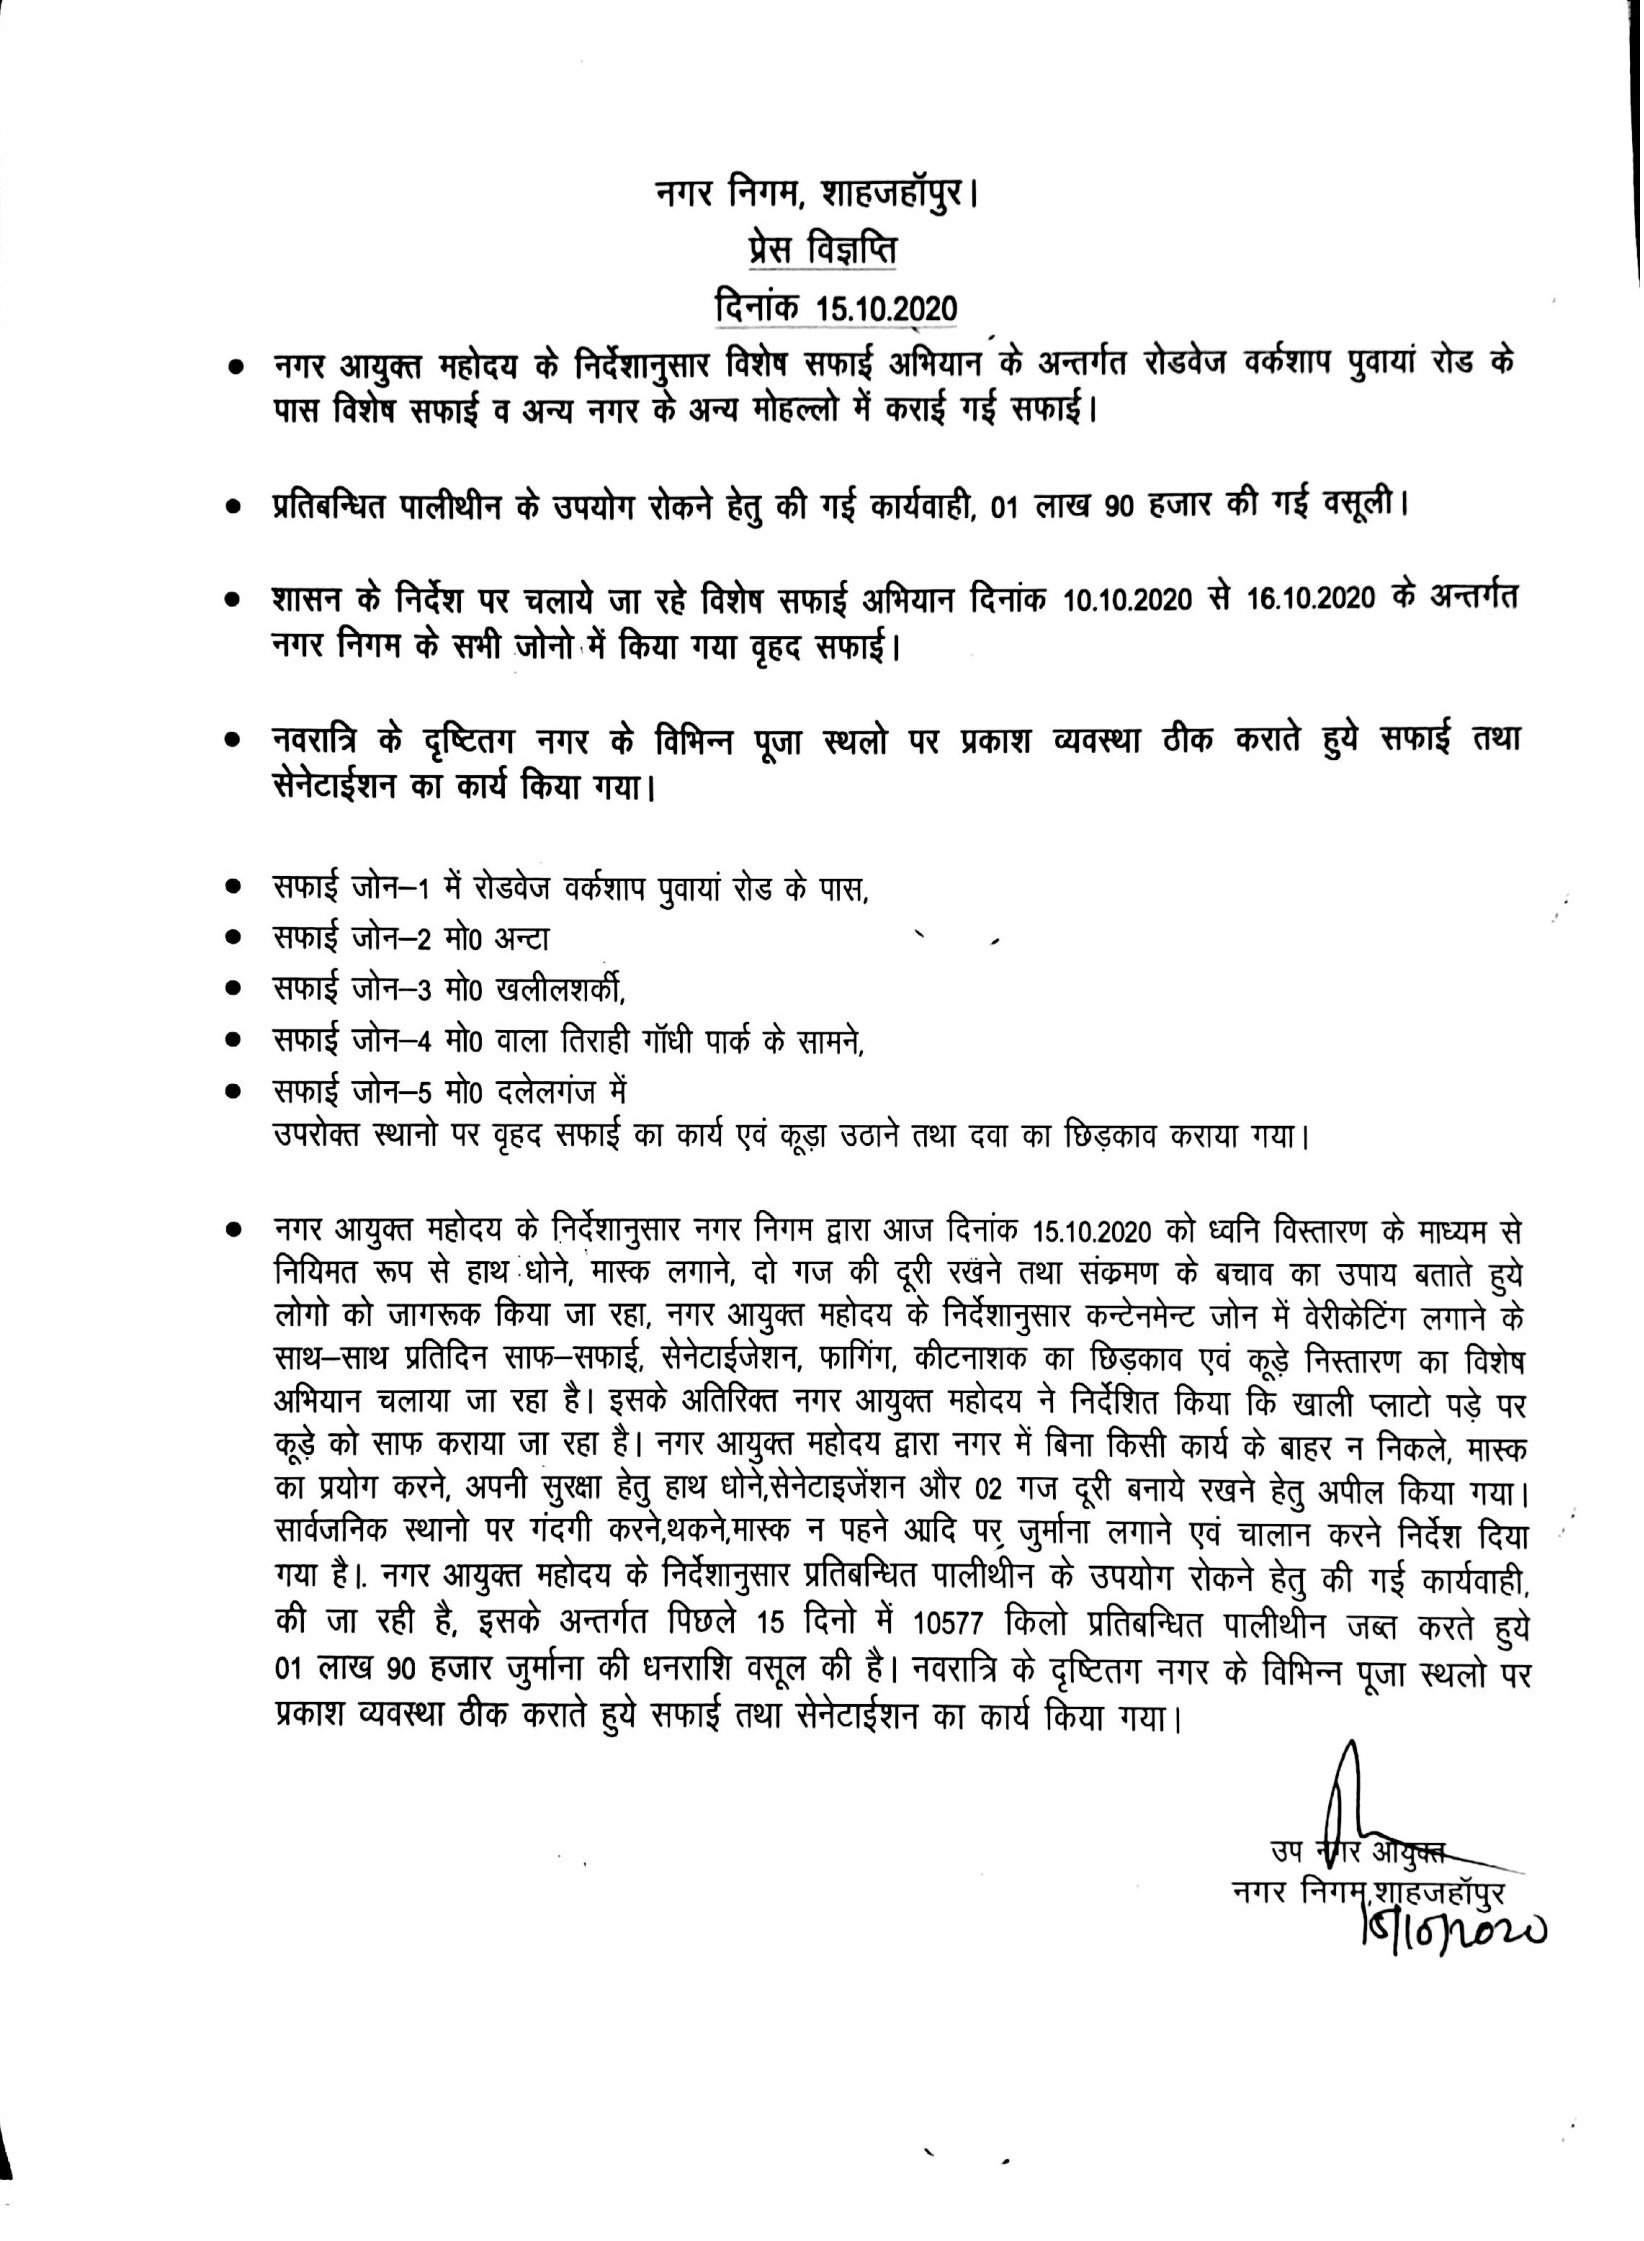 Regarding cleanliness at roadways workshop Puwayan road and in other wards of the city on 15.10.2020 under special cleanliness campaign as per directions of City Commissioner